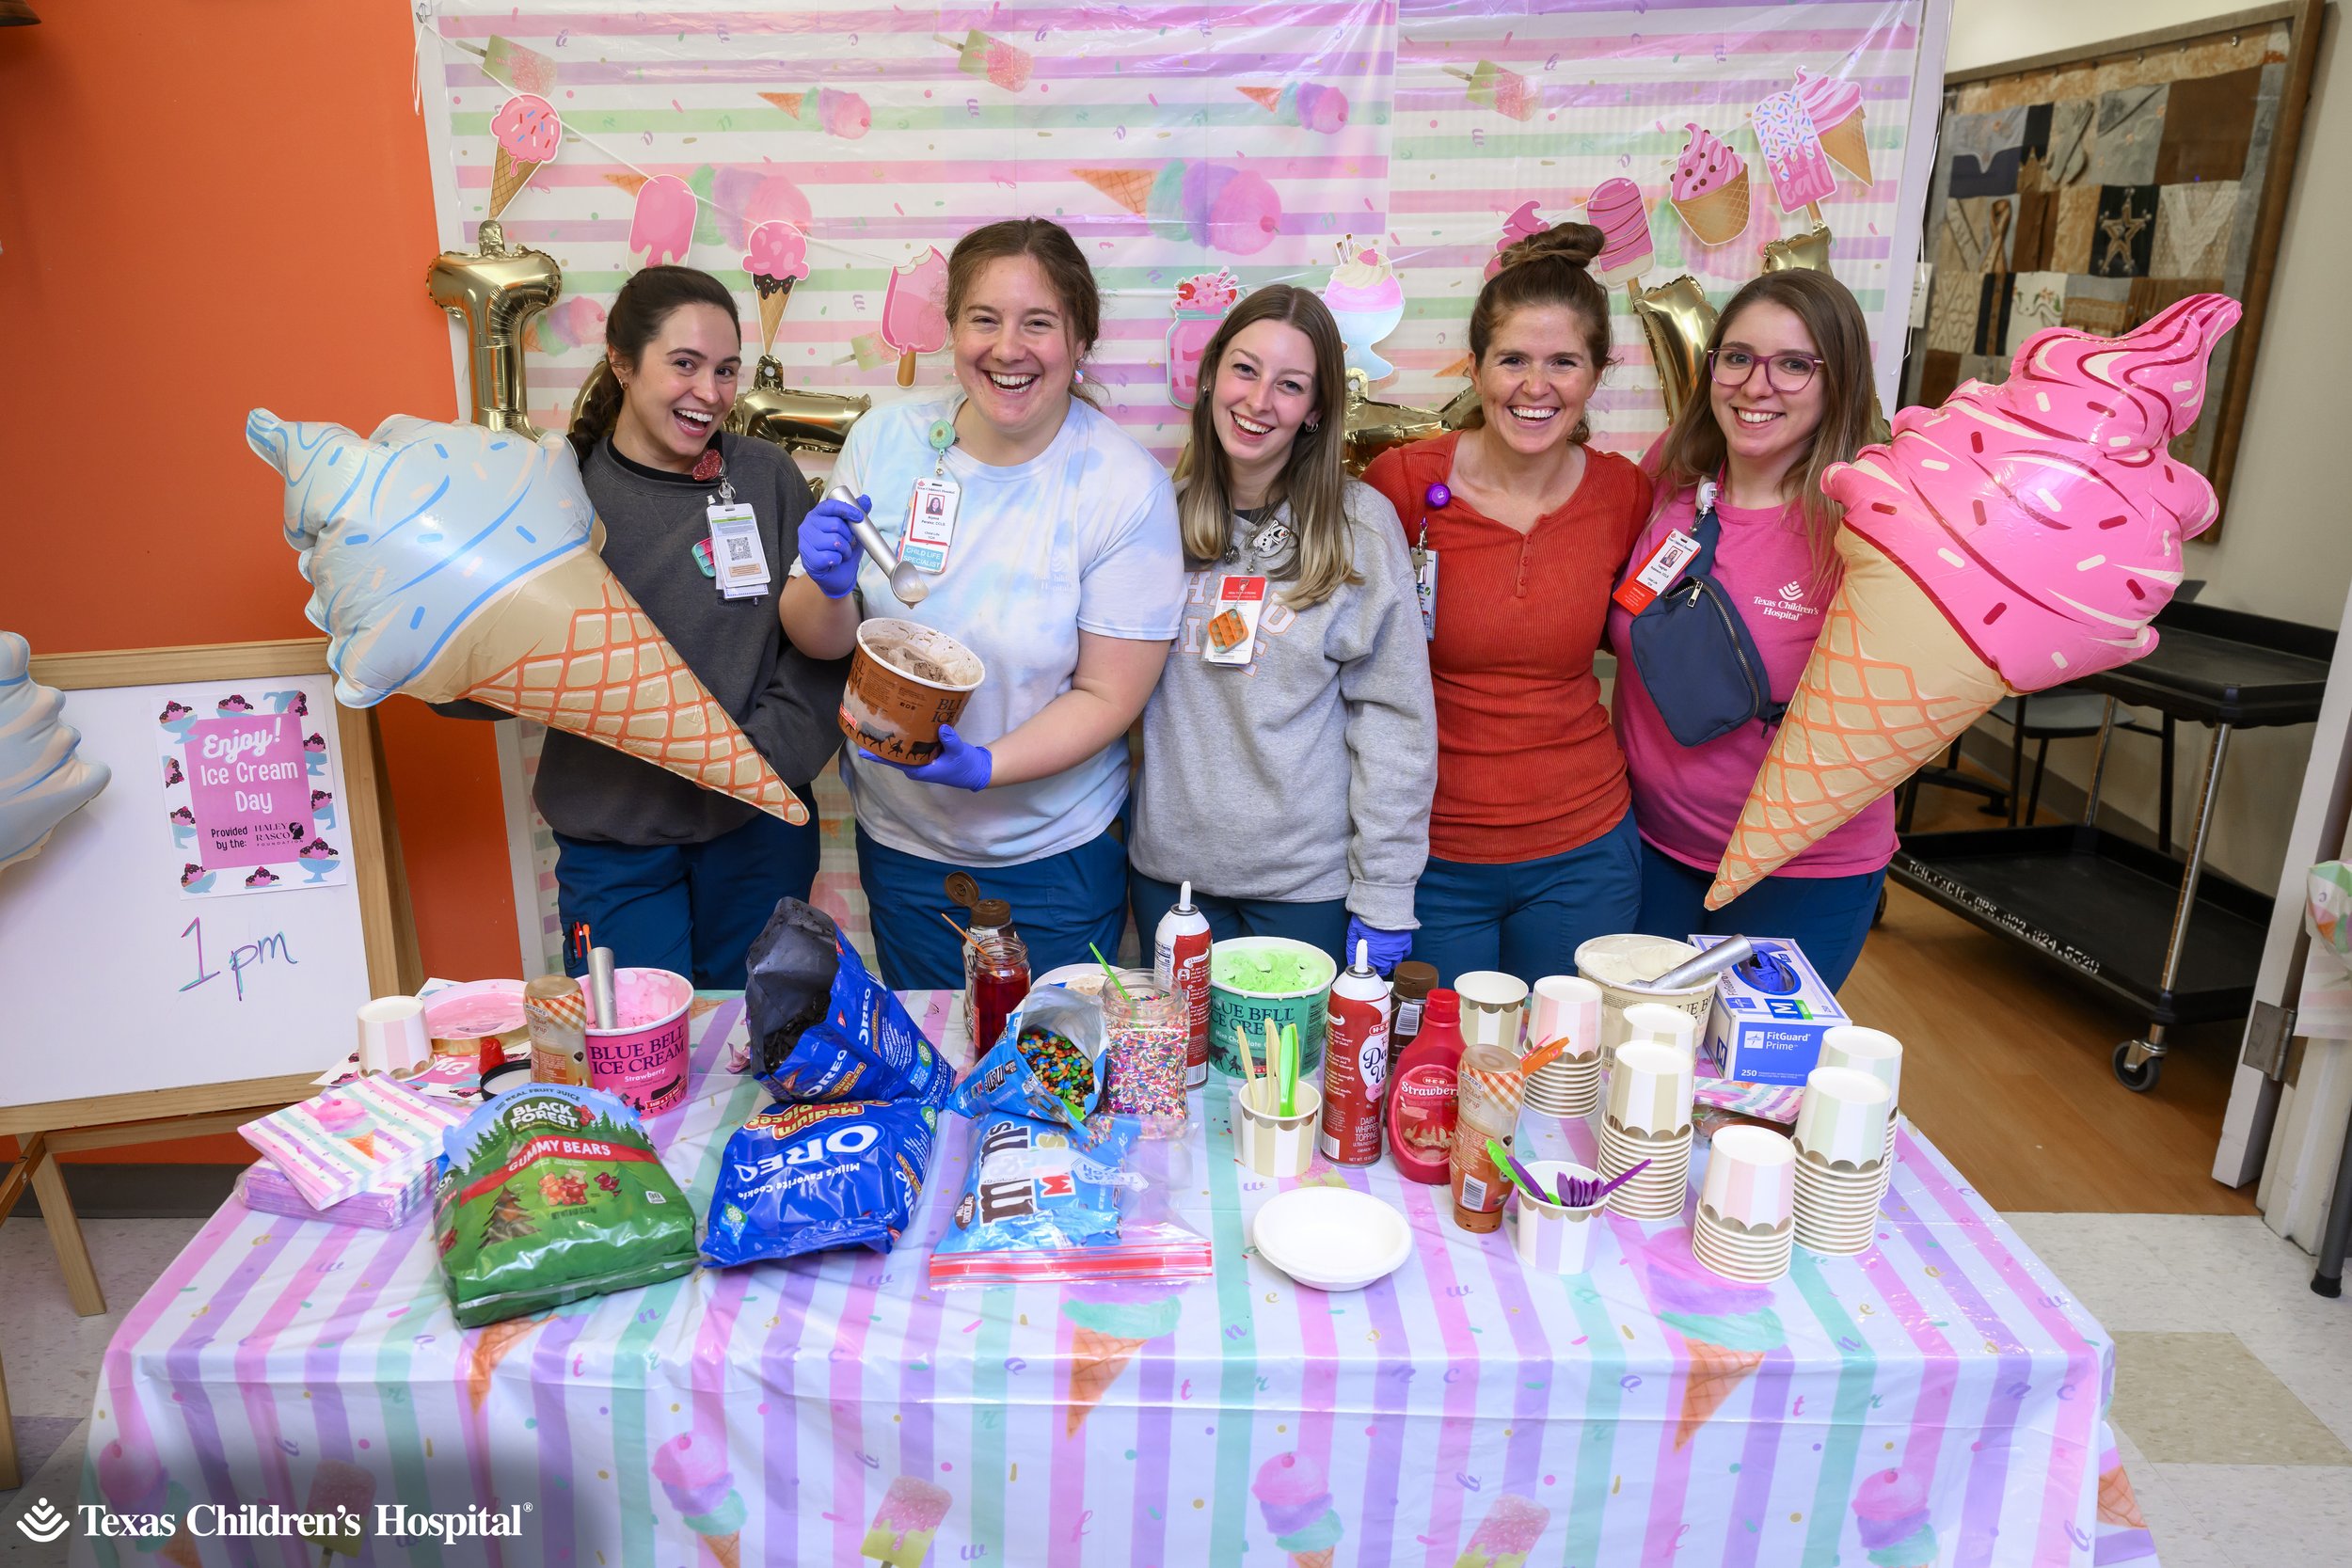 2K23-0406-AK9_3479 Ice Cream Party hosted by Haley Rasco Foundation- Watermarked.jpg